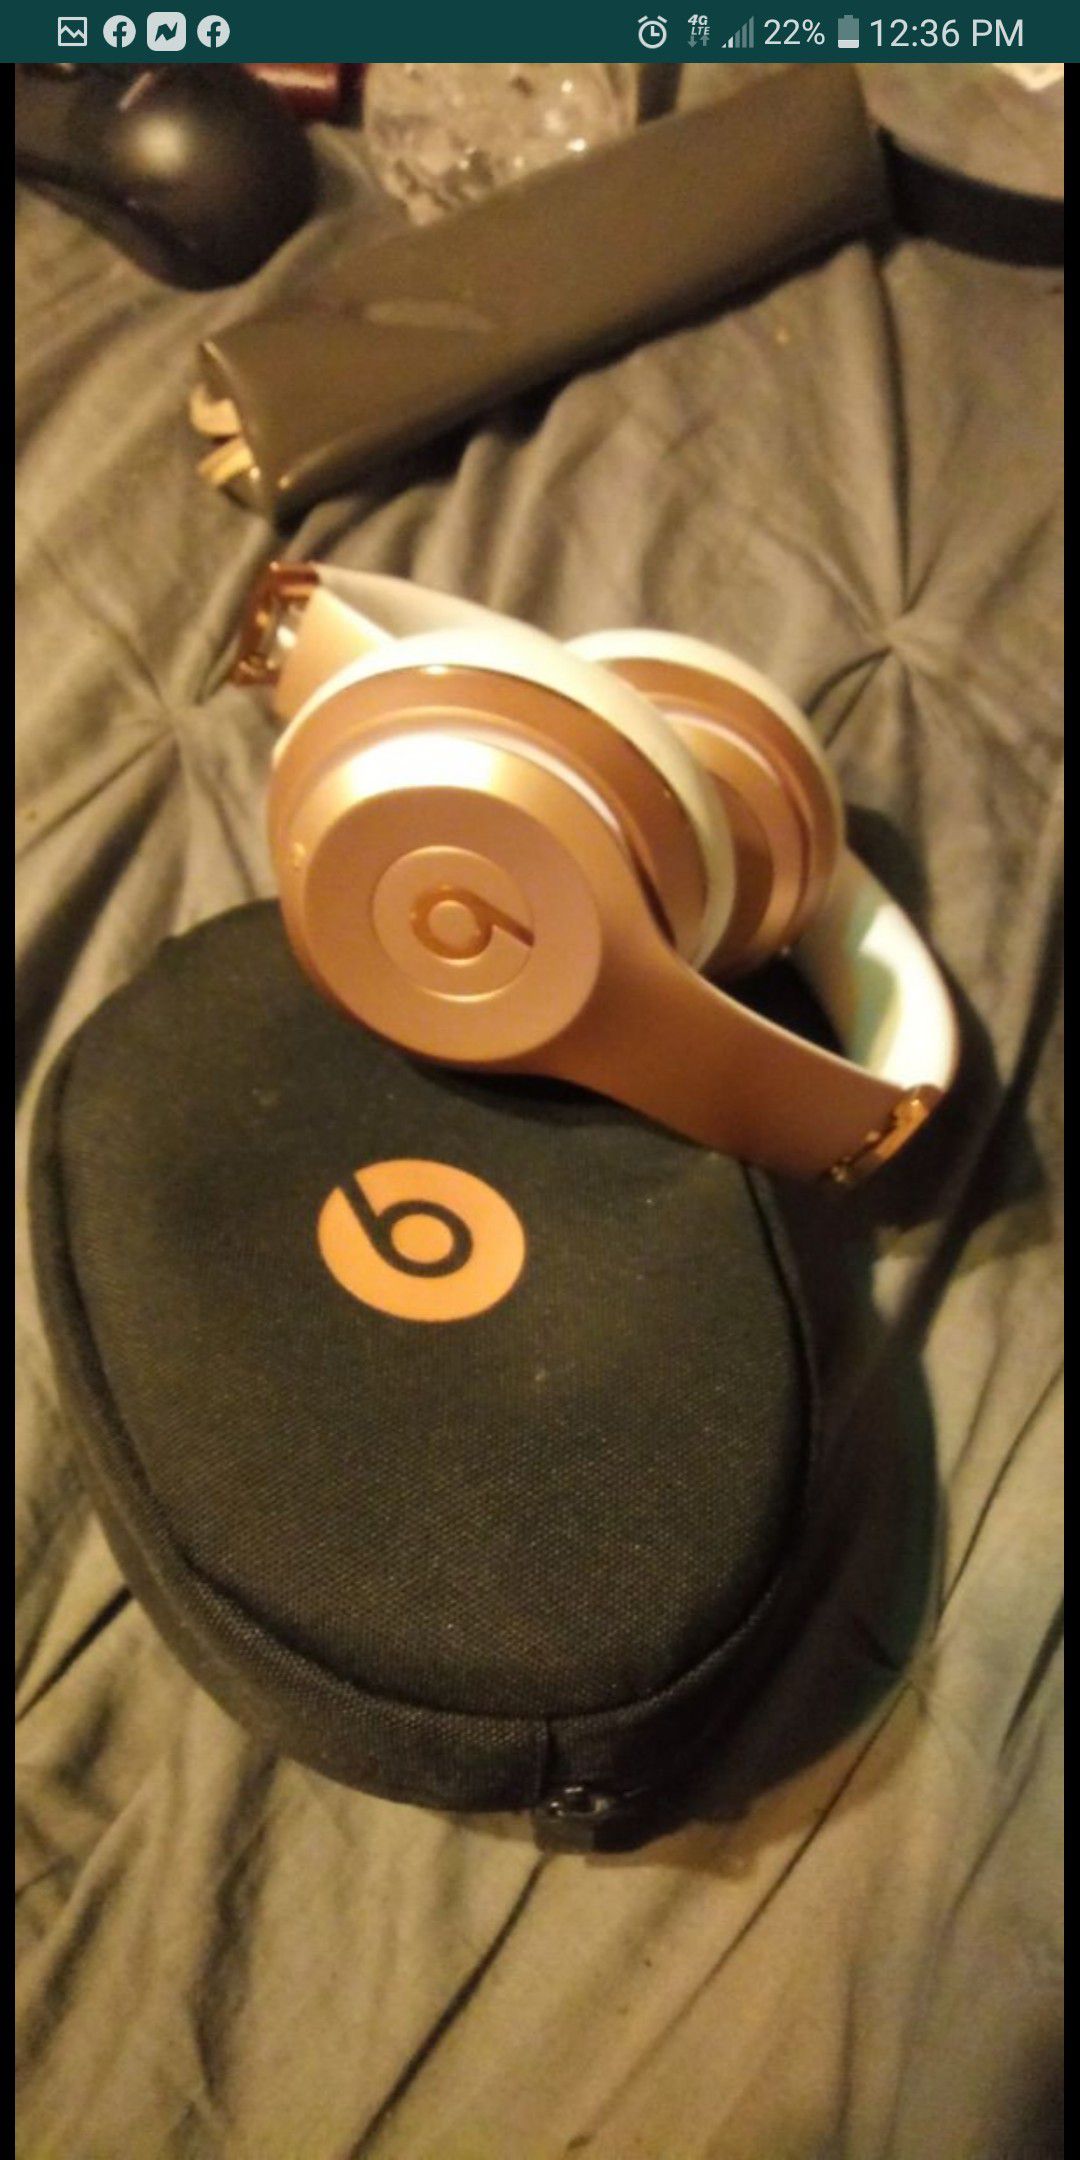 Beats solo 3. Rose gold